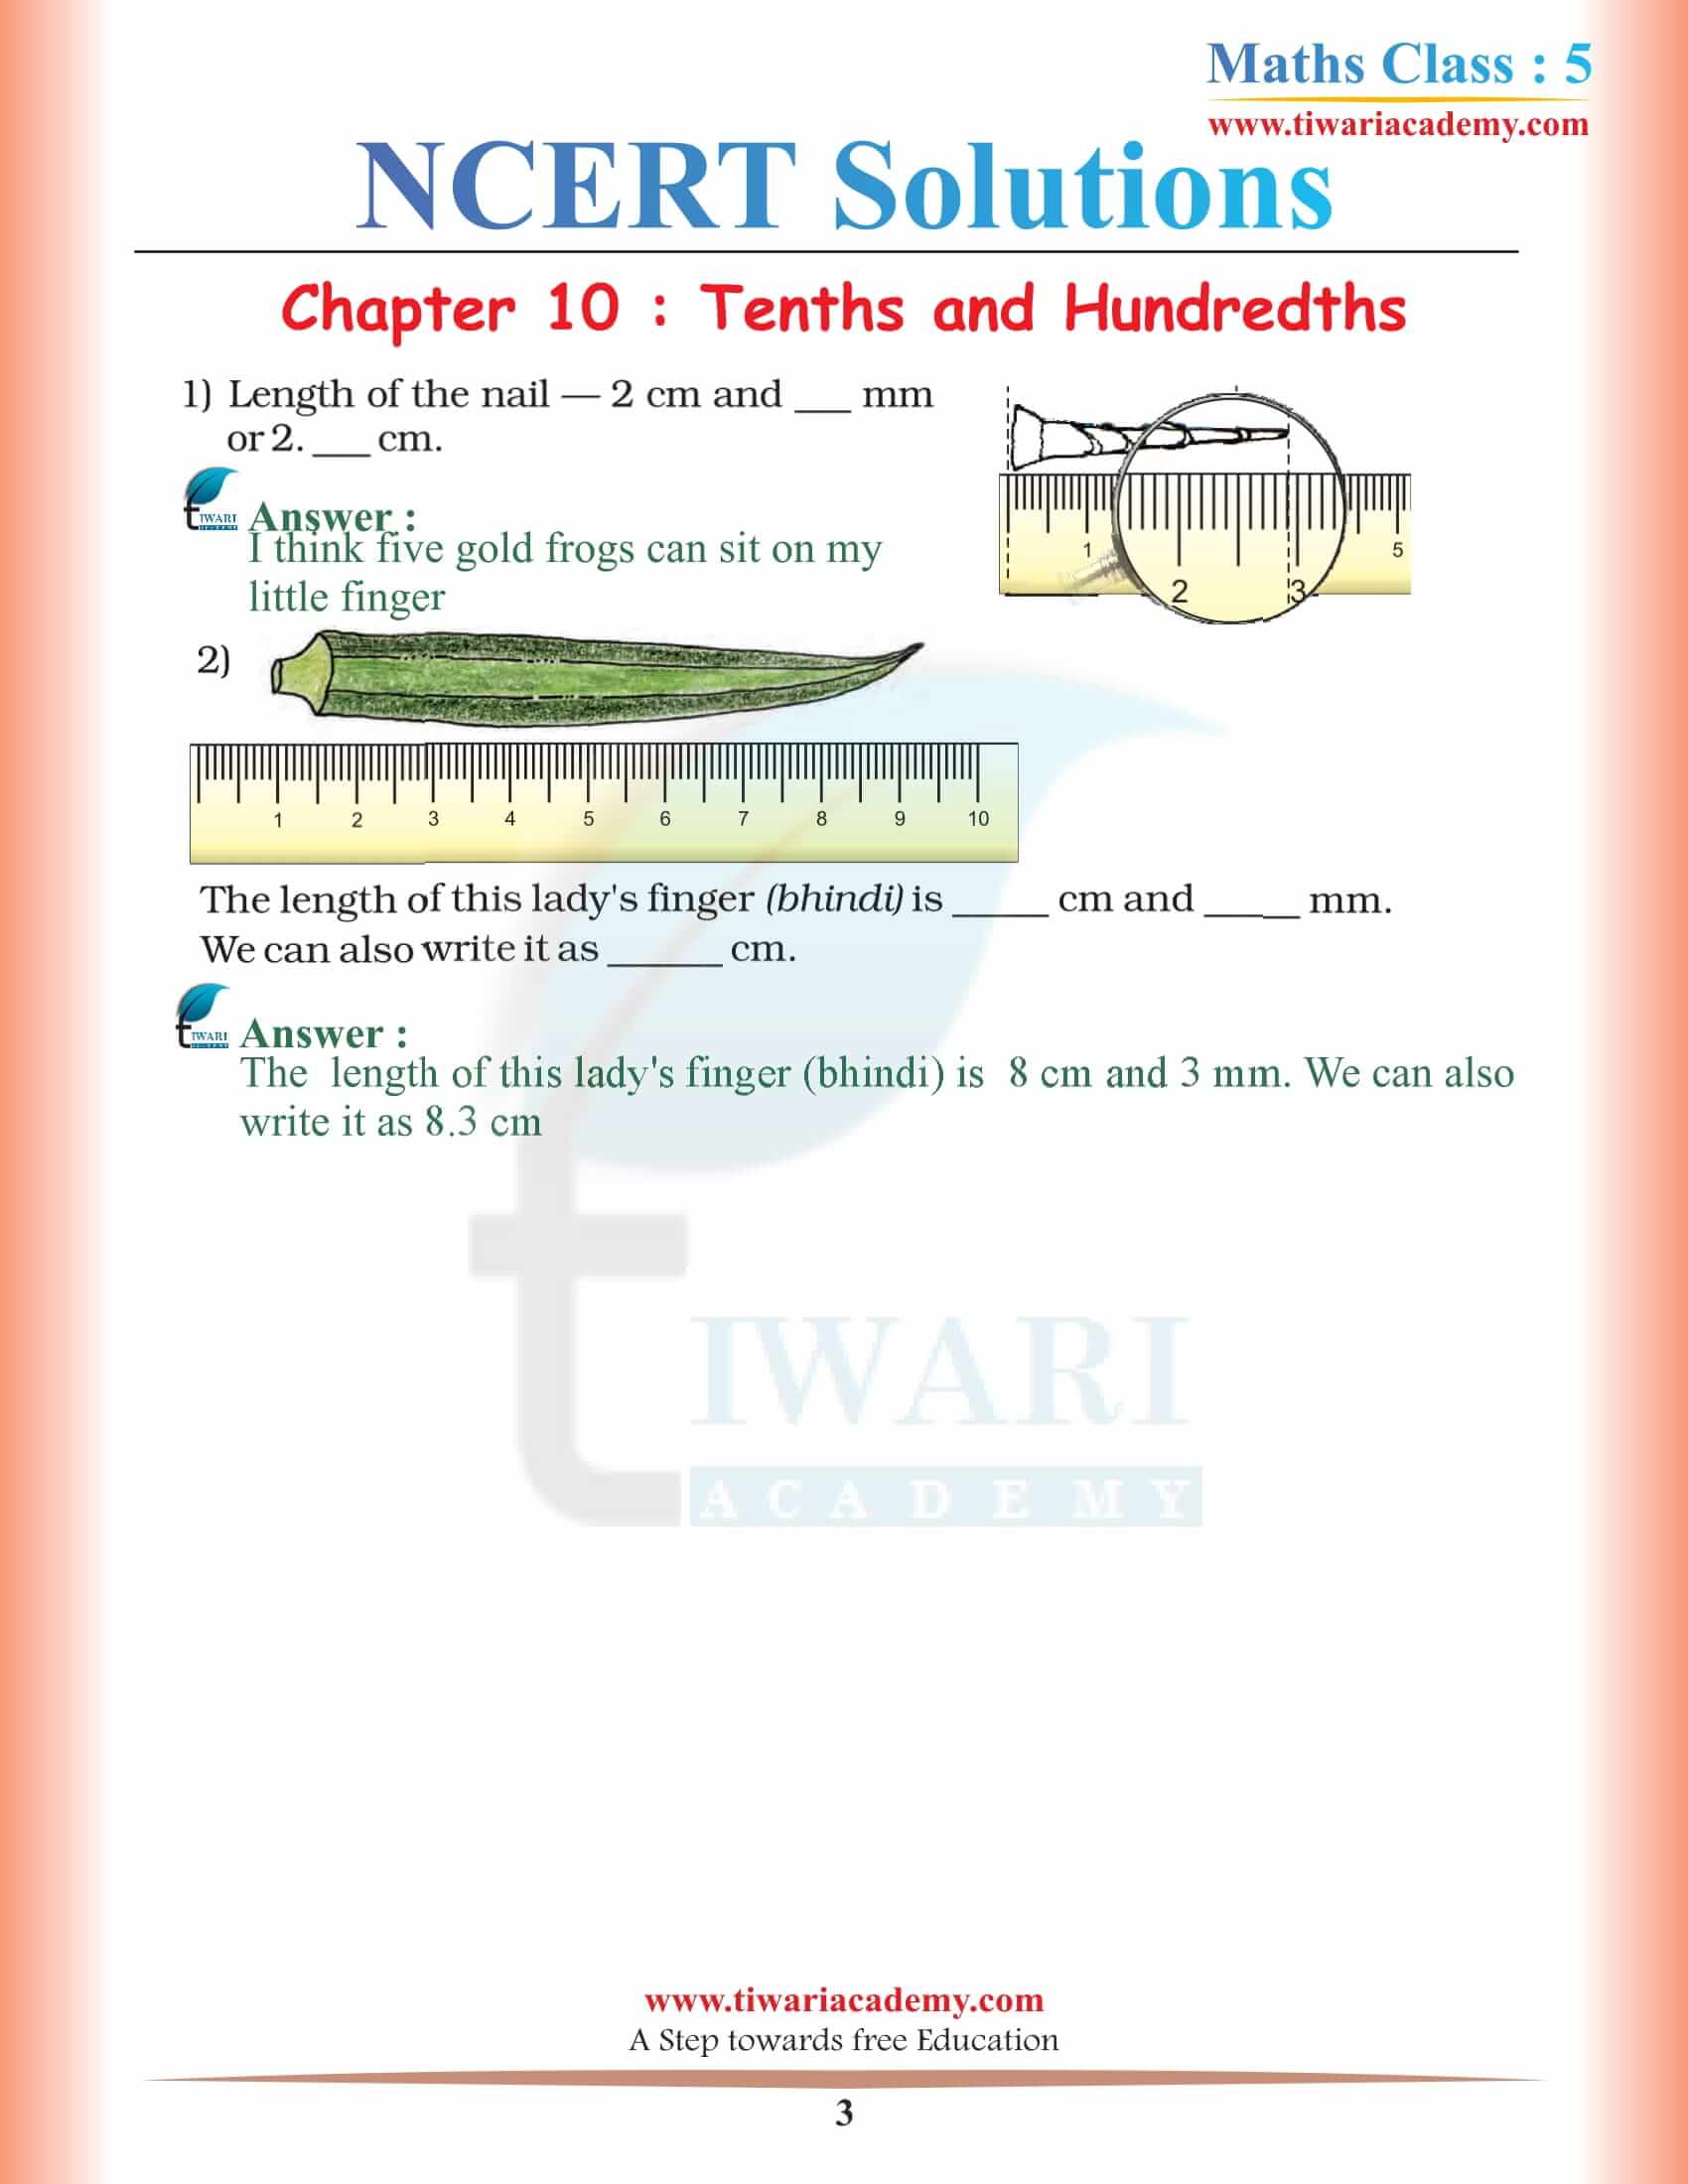 NCERT Solutions for Class 5 Maths Chapter 10 in English Medium